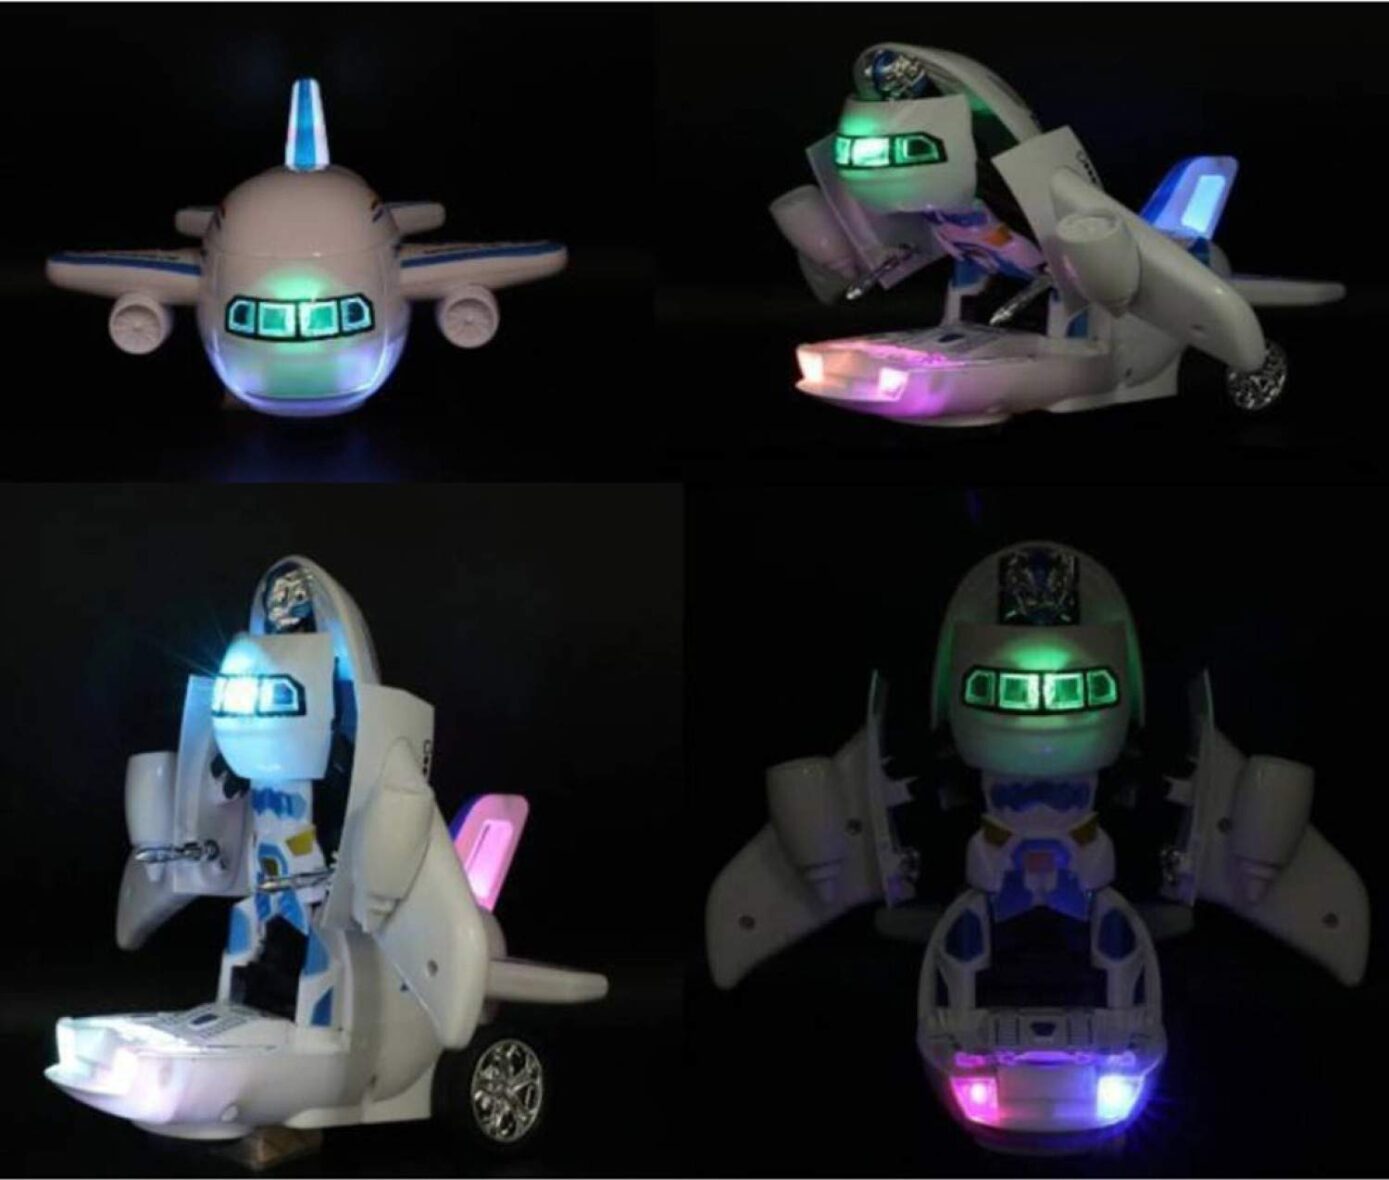 Deformation Aeroplane Airbus Toy – LED Airplane Converting to Robot Toy Transform for Plane